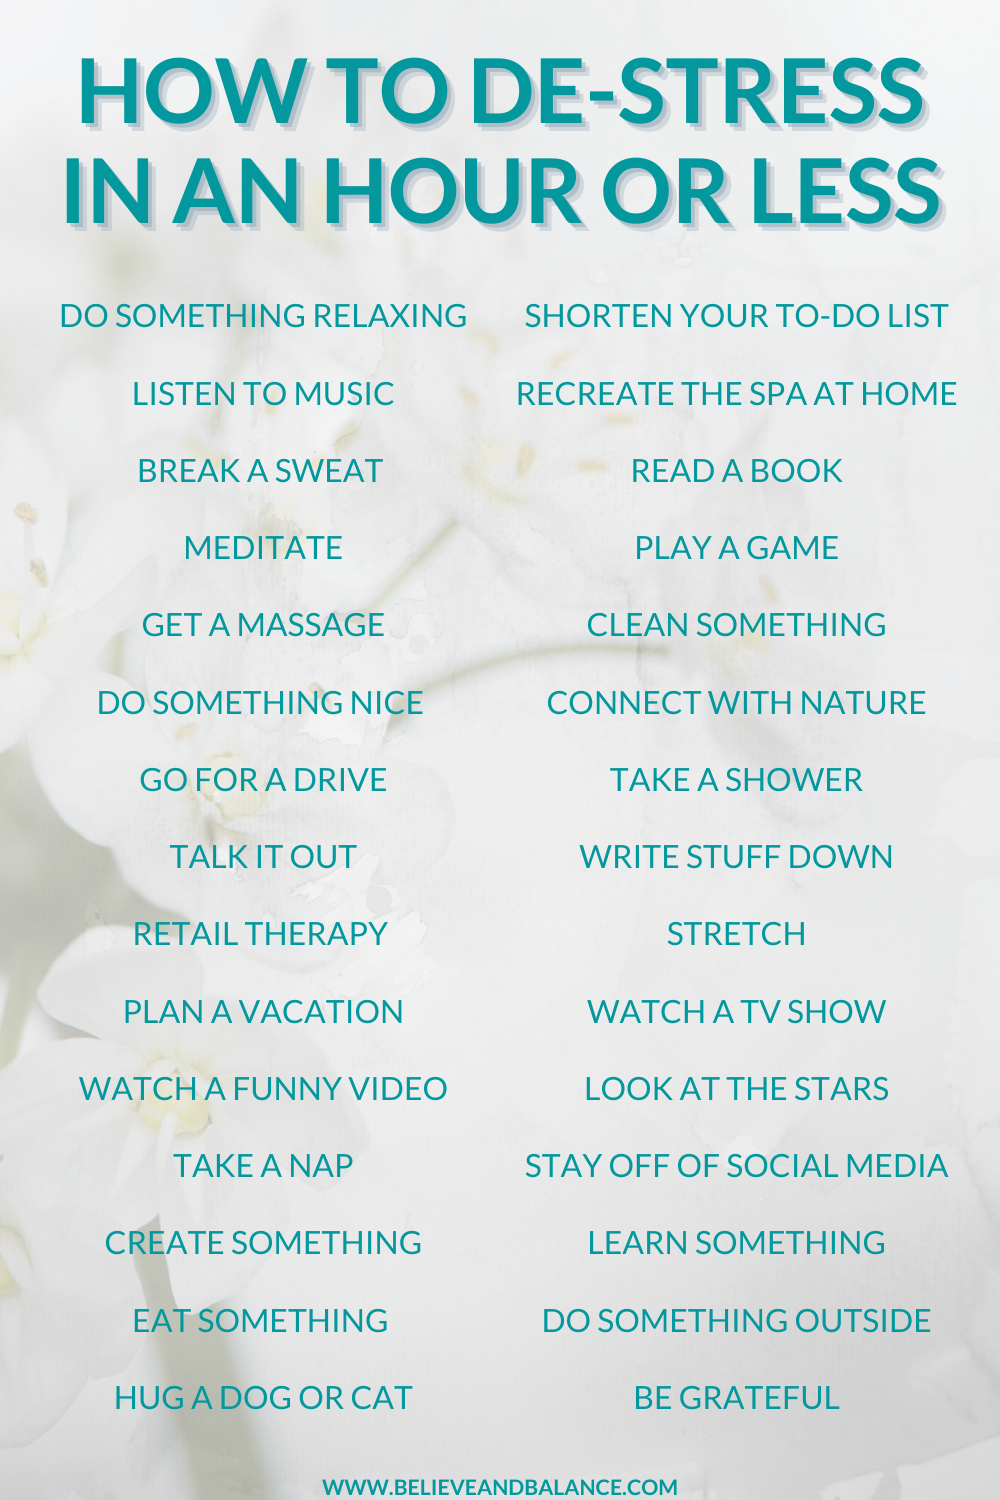 30 Ways to De-stress in an hour or less - 2020.png